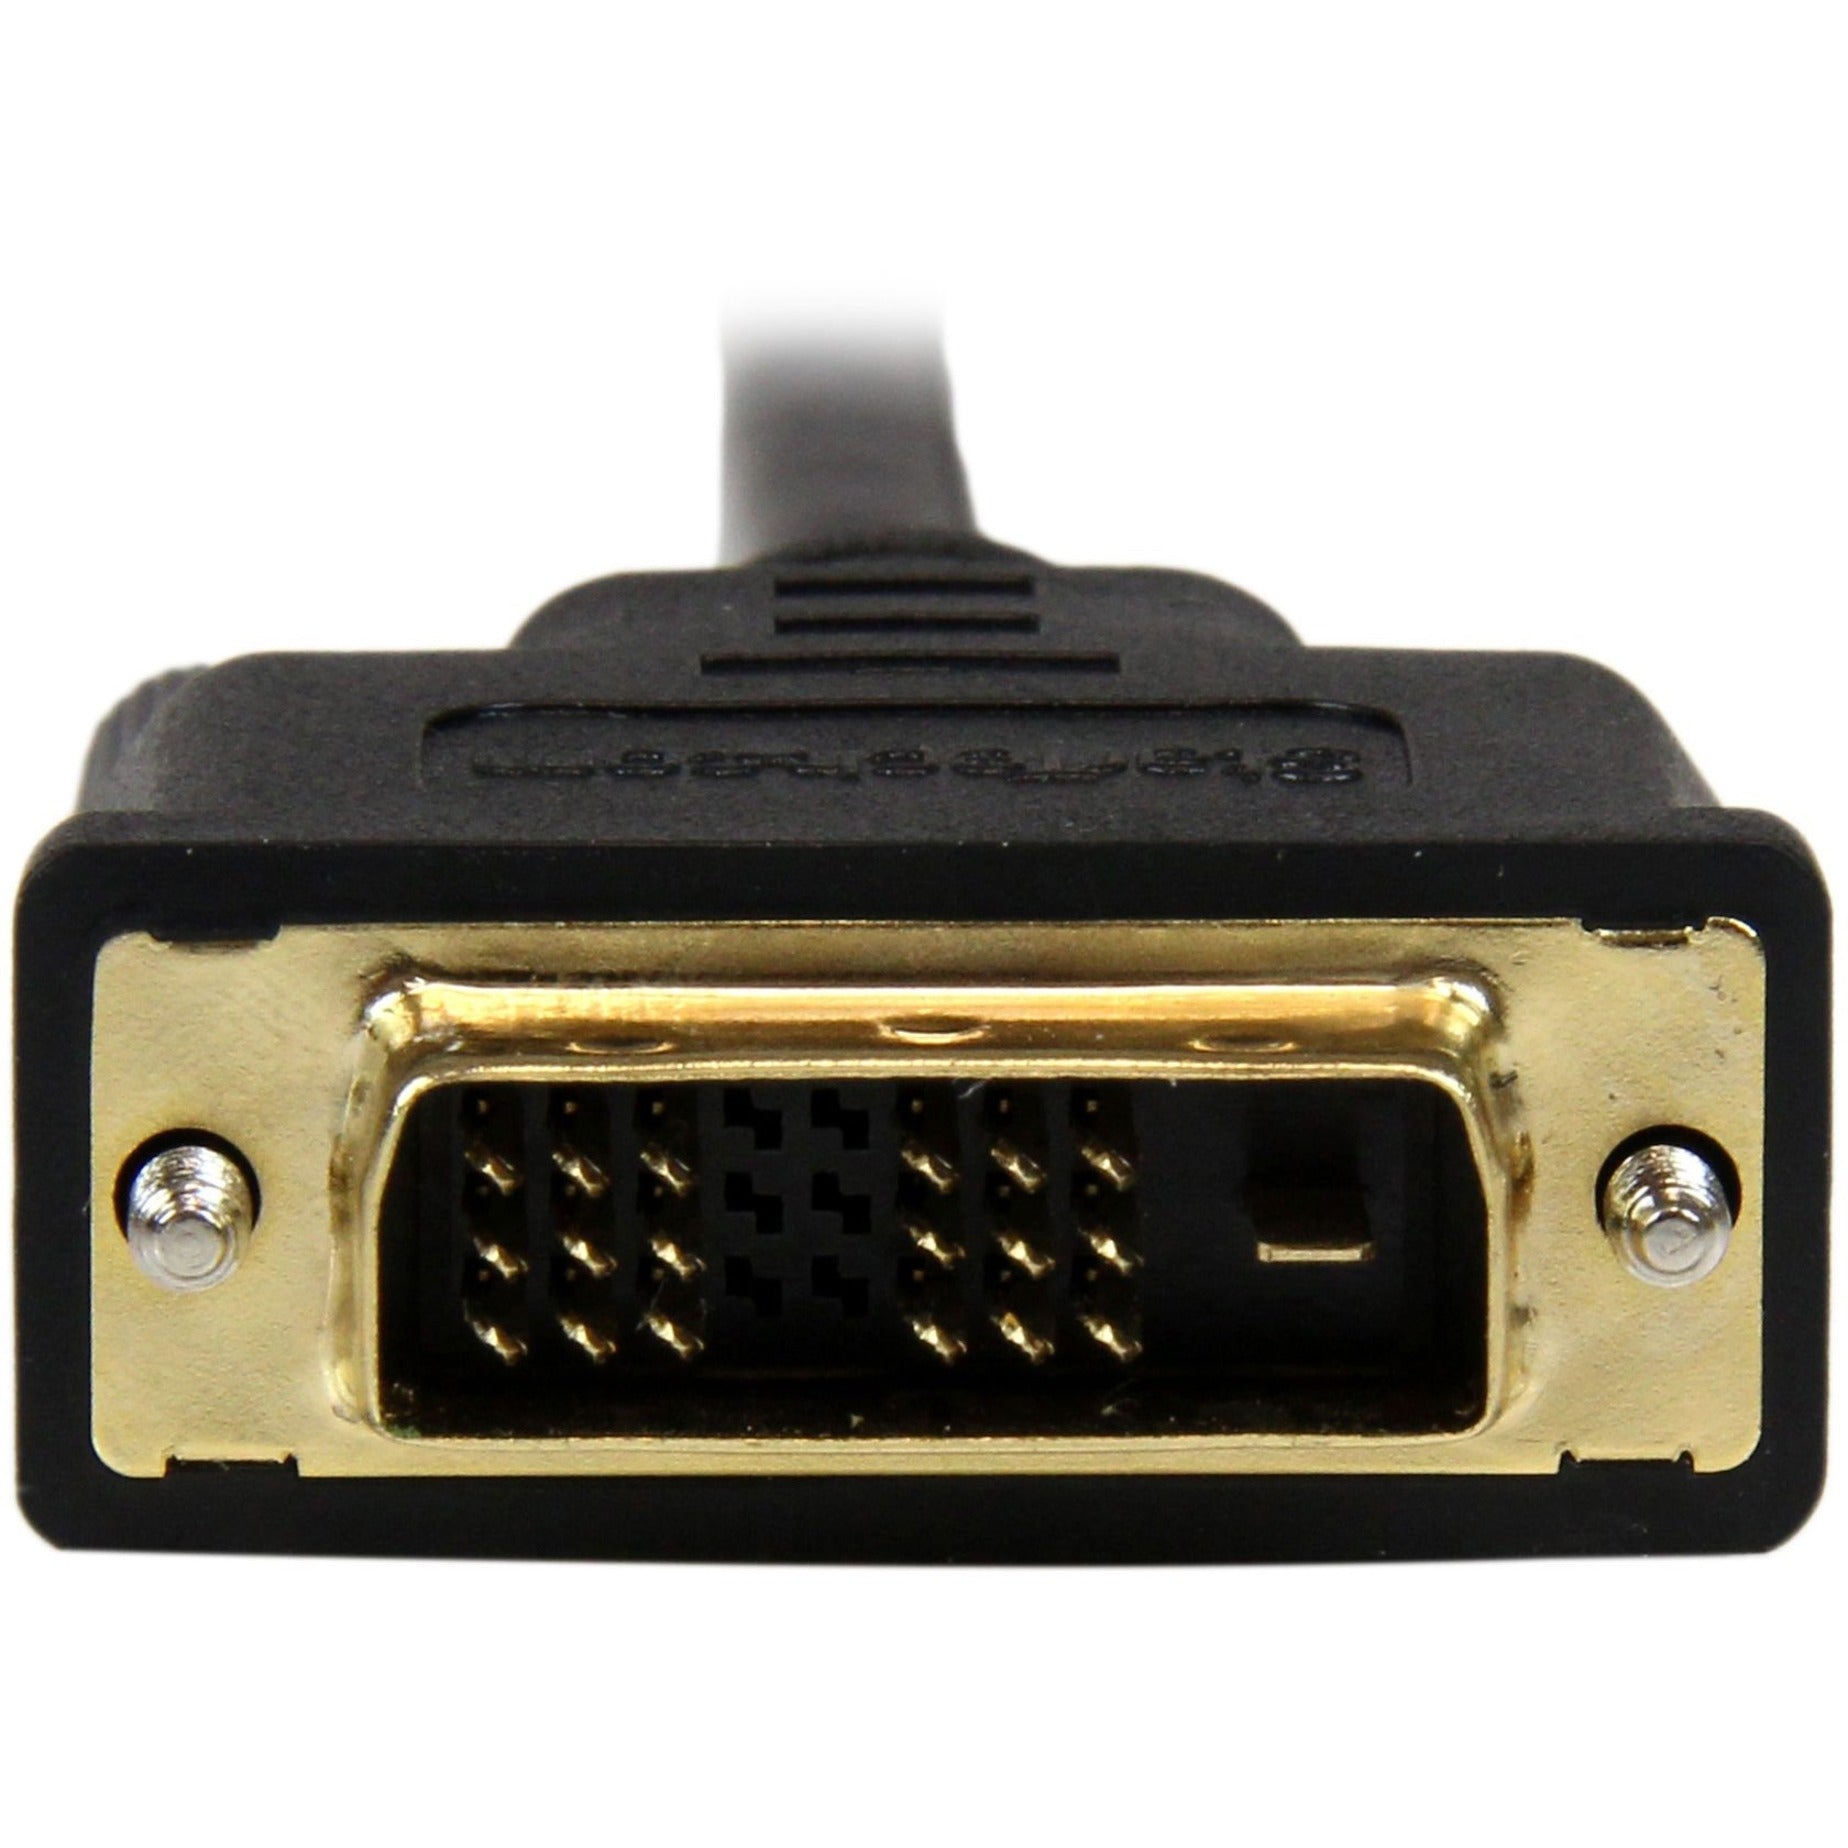 StarTech.com HDDDVIMM1M 1m Micro HDMI to DVI-D Cable - M/M, Fray Resistant, Flexible, EMI Protection